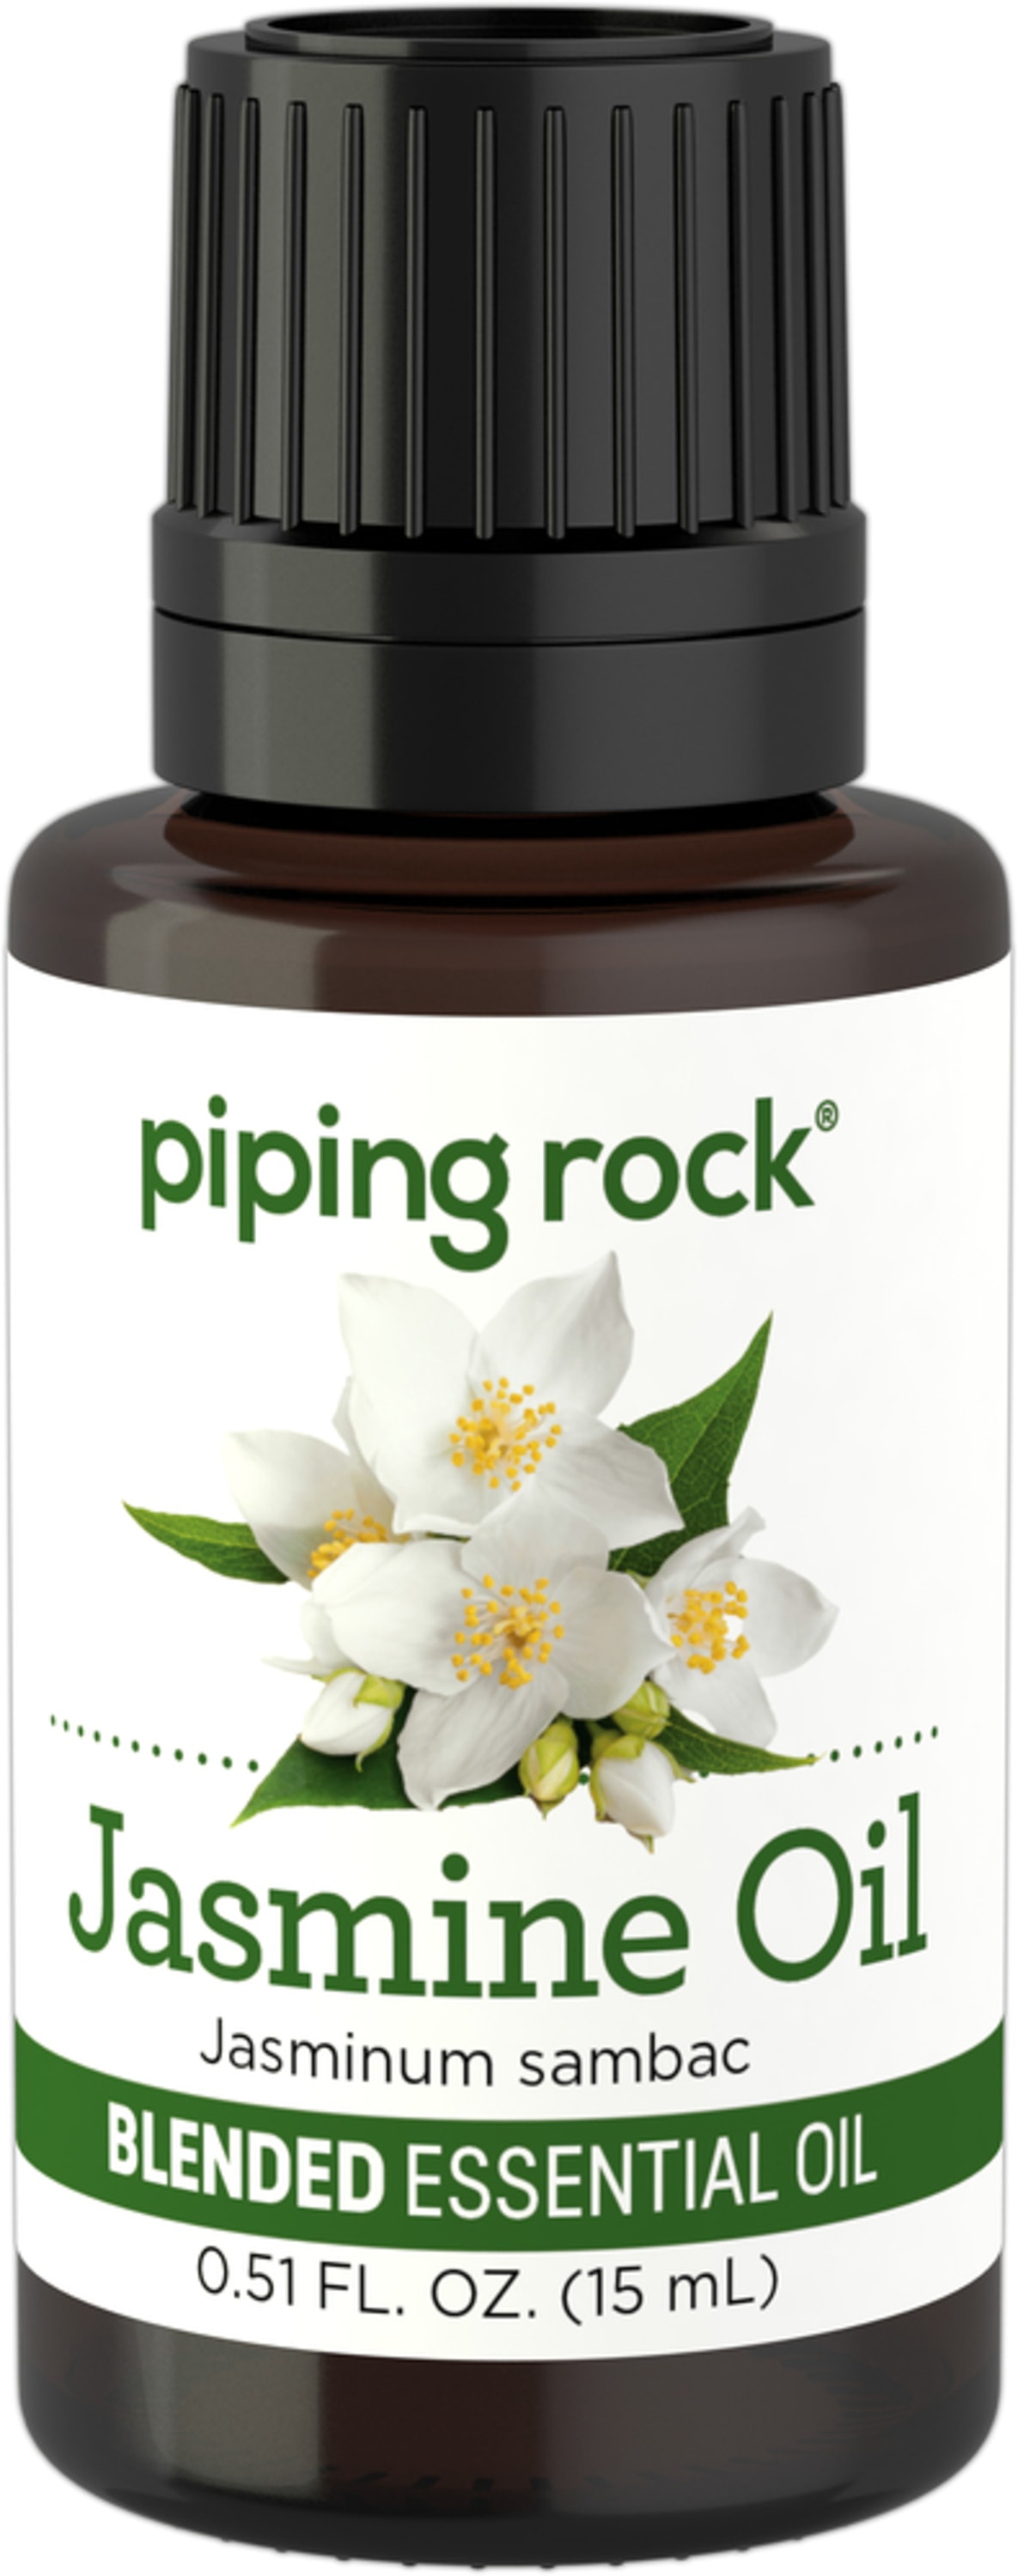 https://cdn2.pipingrock.com/images/product/amazon/product/jasmine-absolute-essential-oil-blend-gcms-tested-12-fl-oz-15-ml-dropper-bottle-4541.jpg?tx=w_3000,h_3000,c_fit&v=3